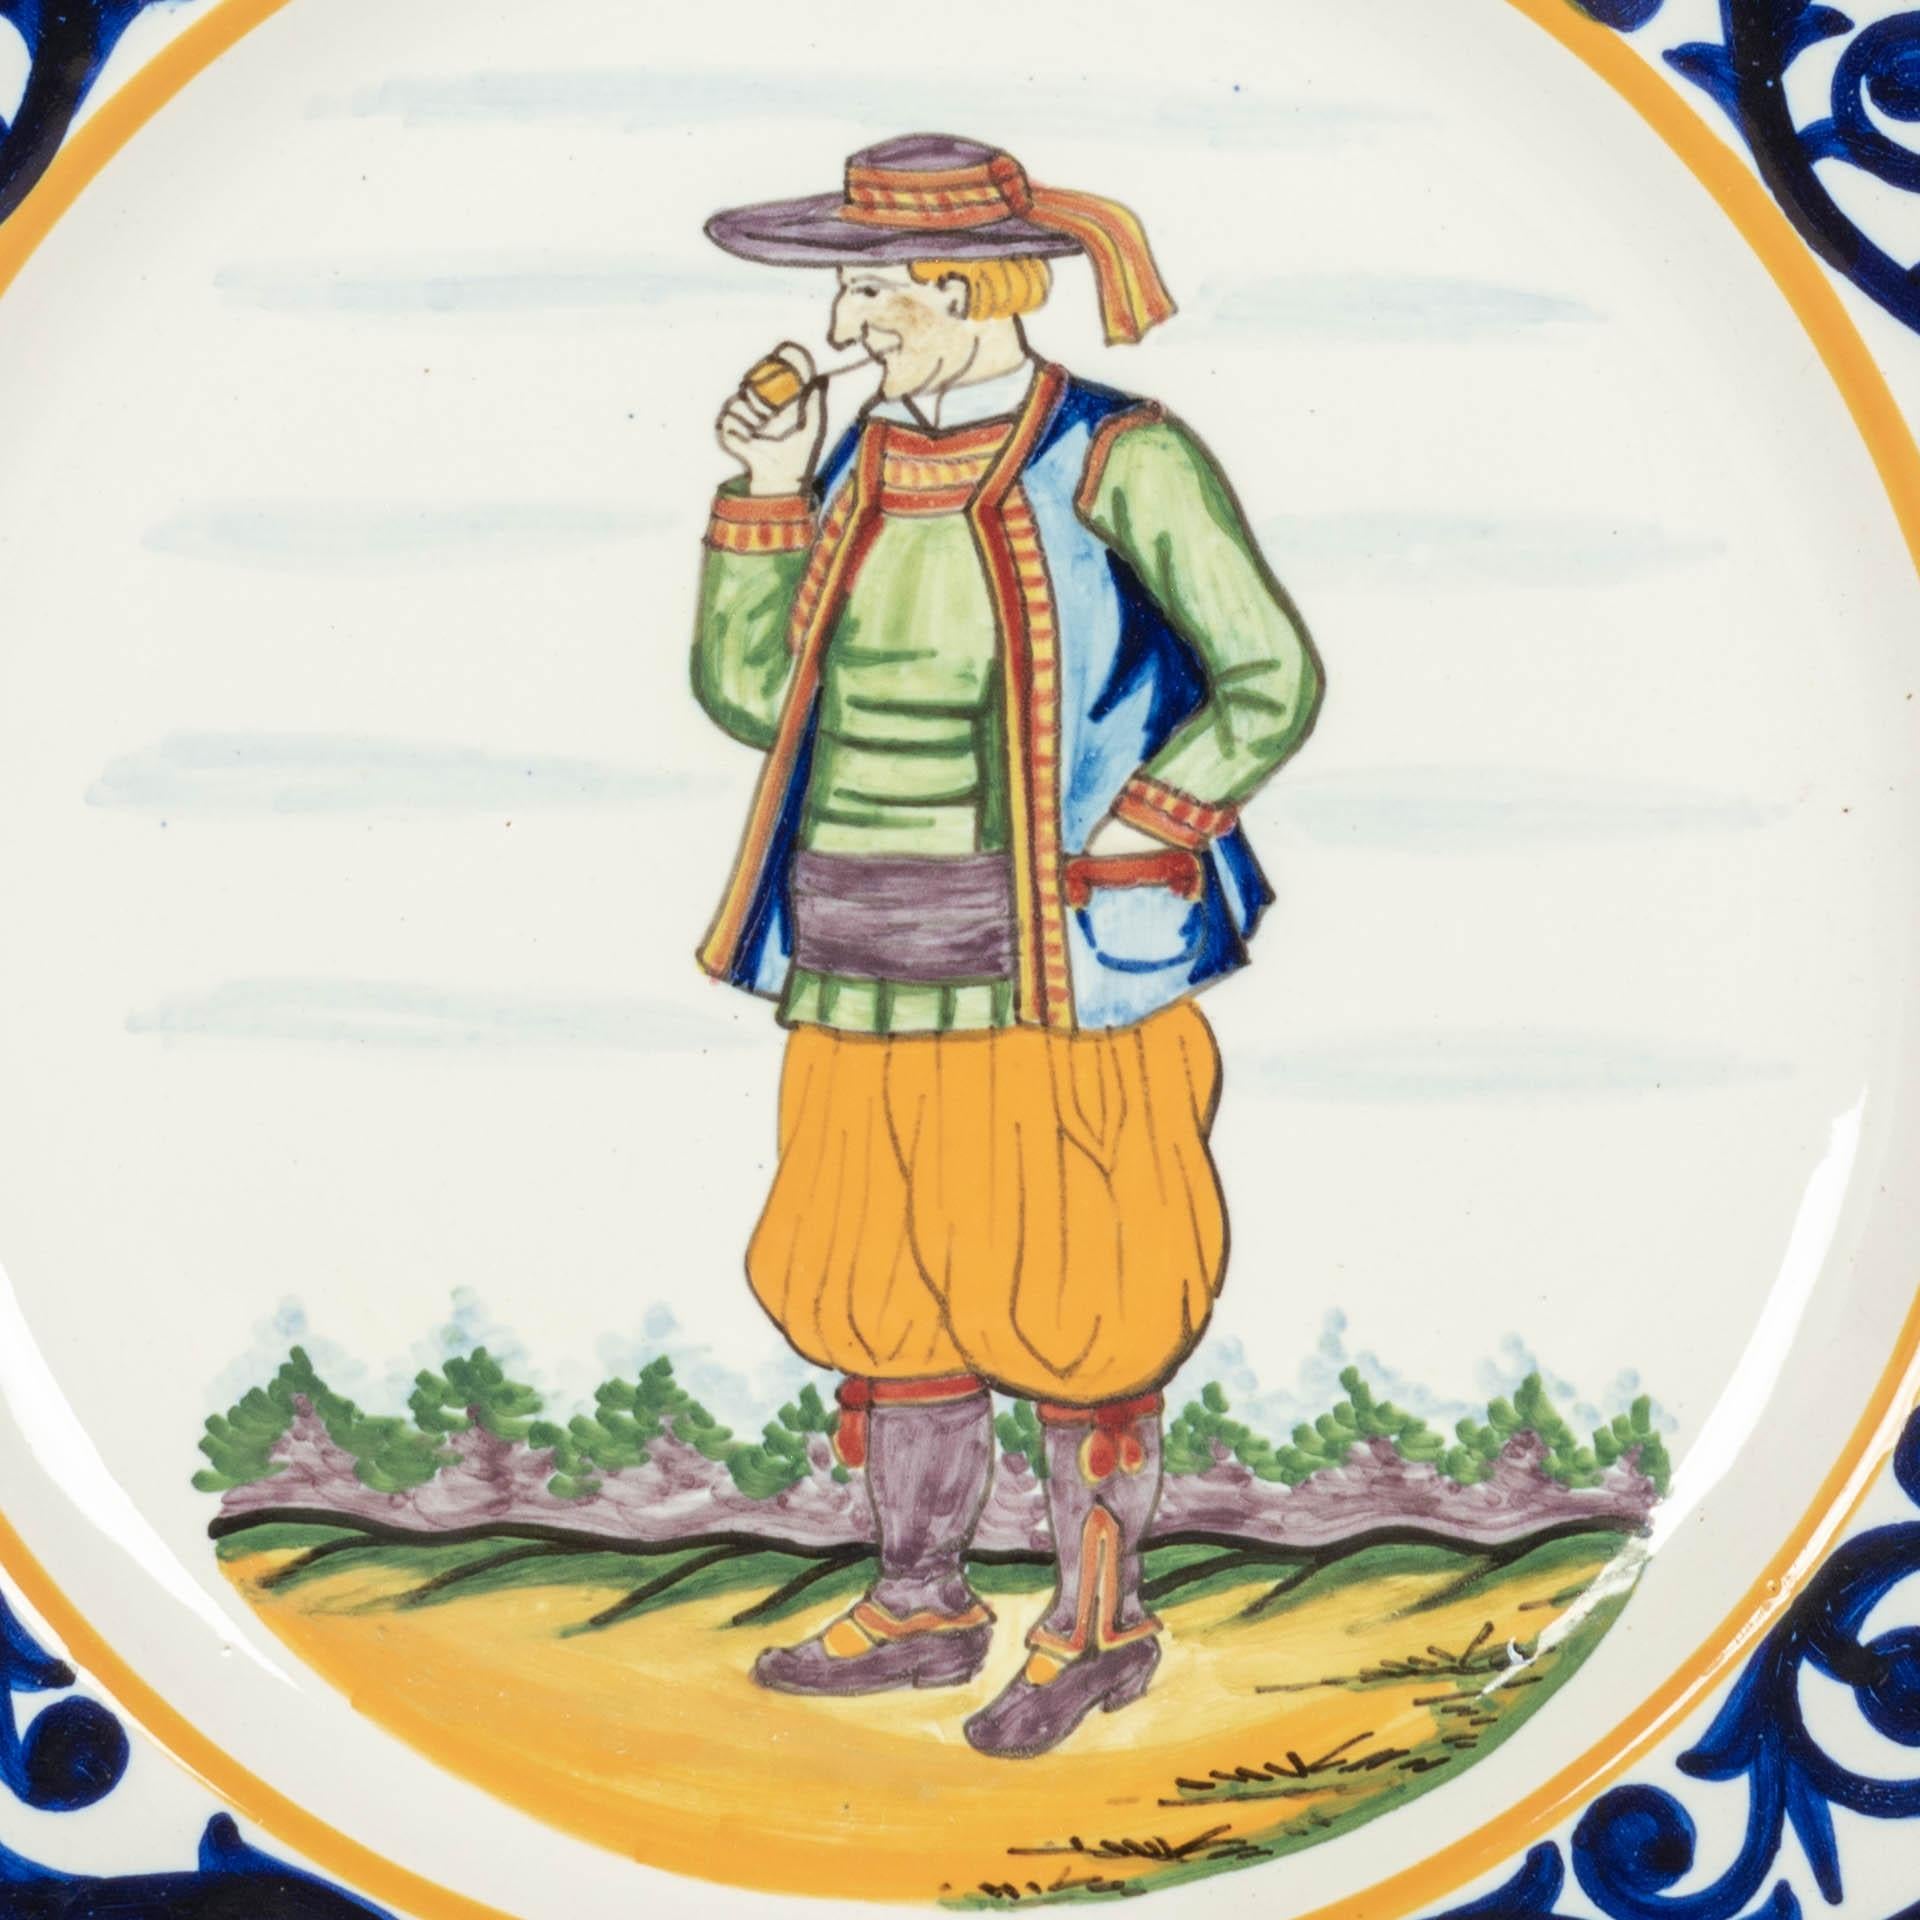 A Henriot Quimper French faience hand painted decorative plate, depicting a Breton Man with pipe in traditional clothing. Blue foliate border and with Quimper sheep crest at the top. A good quality, thick plate with minor loss to glaze. Mark on